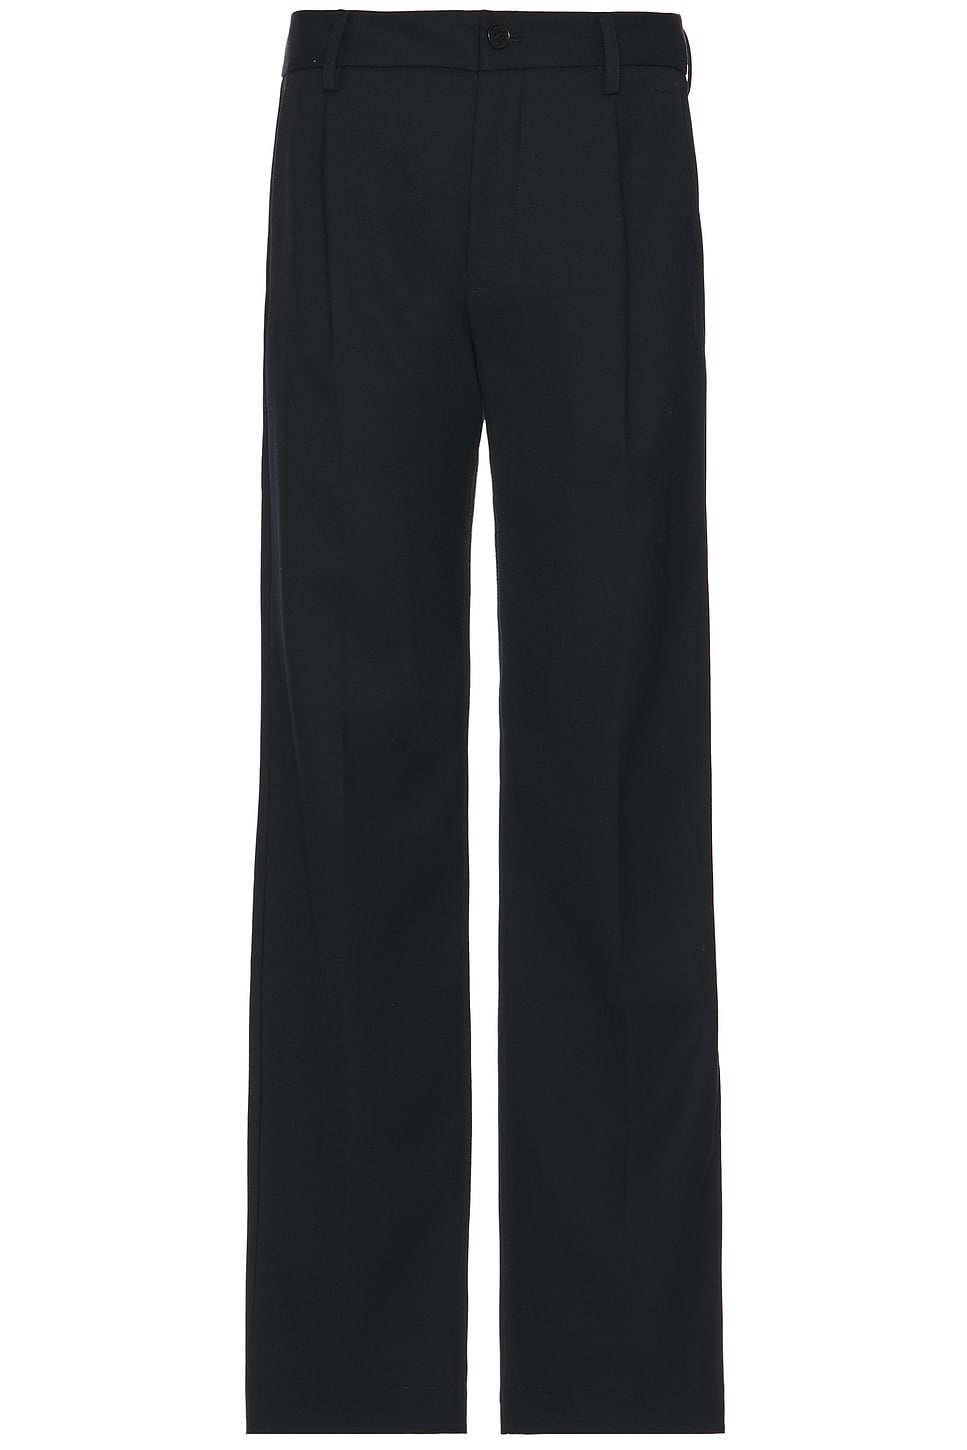 Kane Relaxed Pants in Black